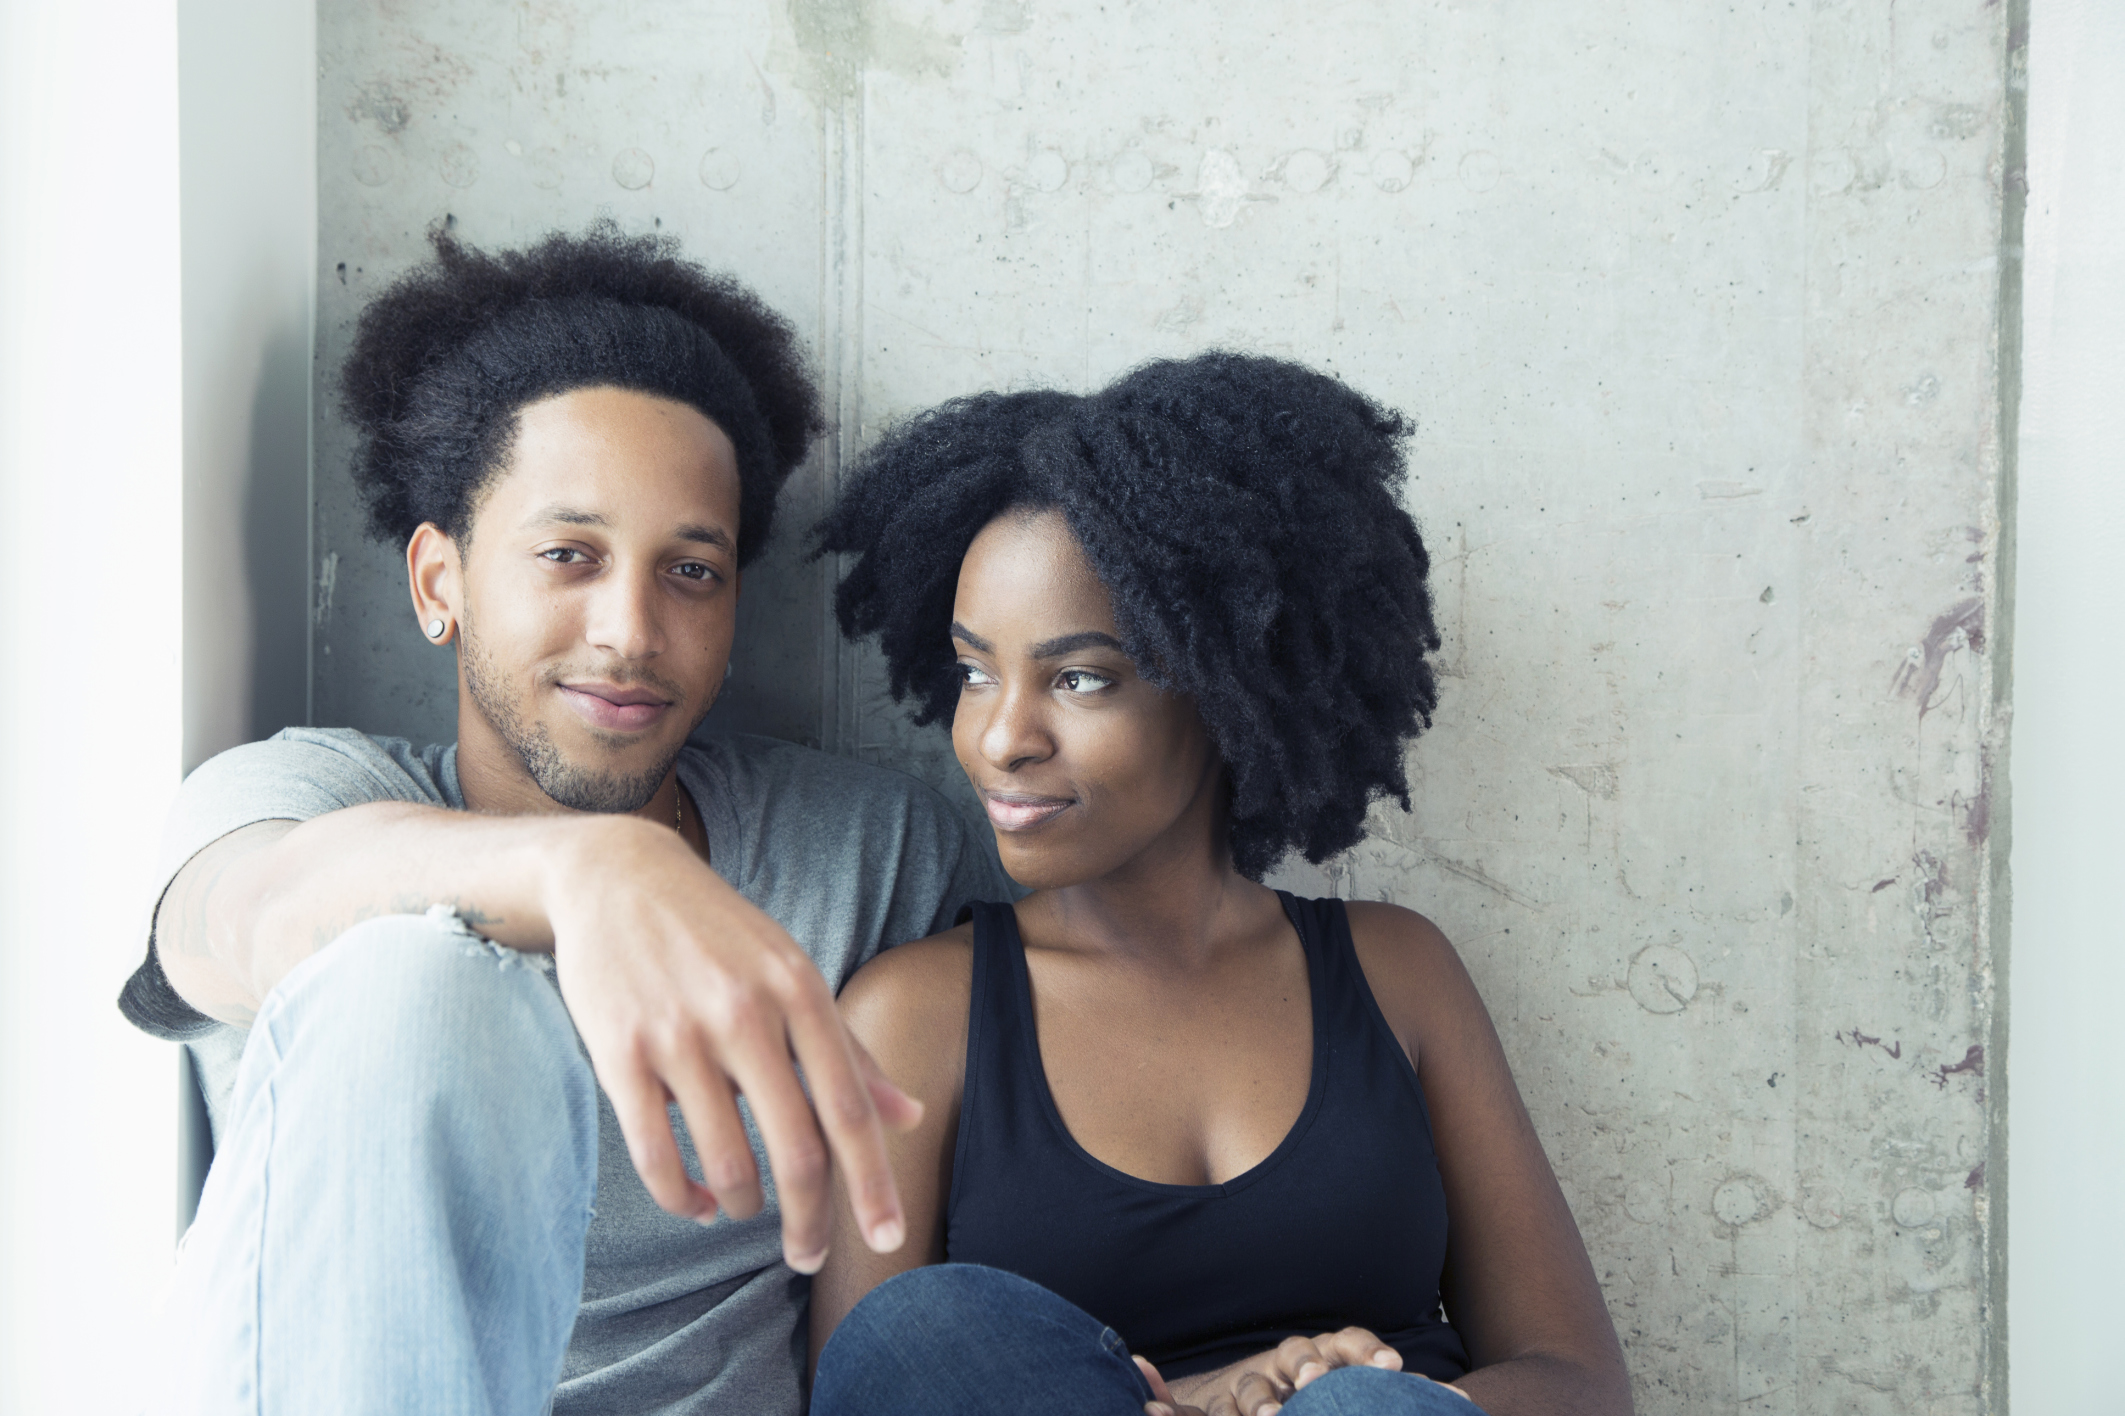 Though the chances are low, partners can move beyond cheating to have a happier relationship afterwards. [Credit: Gary John Norman / Getty]